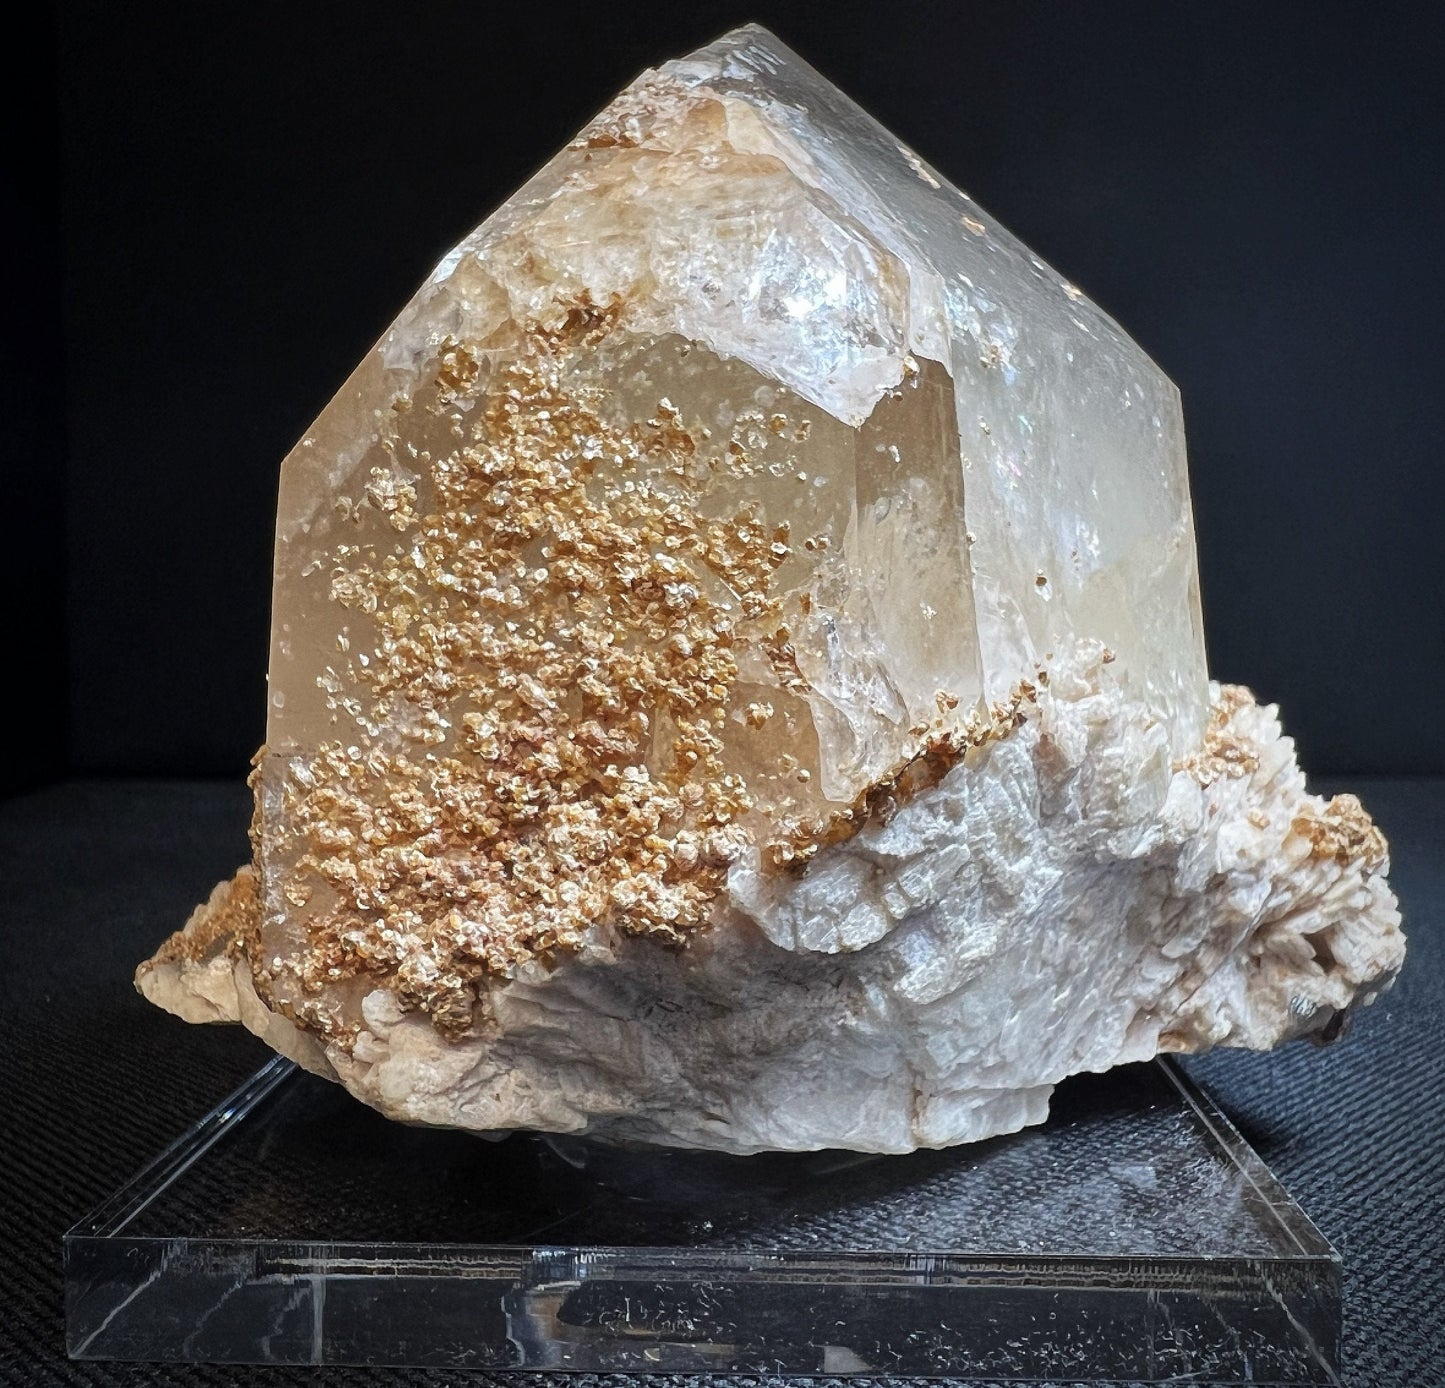 Quartz On Cleavelandite From The Cruzeiro Mine, Minas Gerais, Brazil- Collectors Piece, Home Décor, Gift, Crystal (Stand Included)